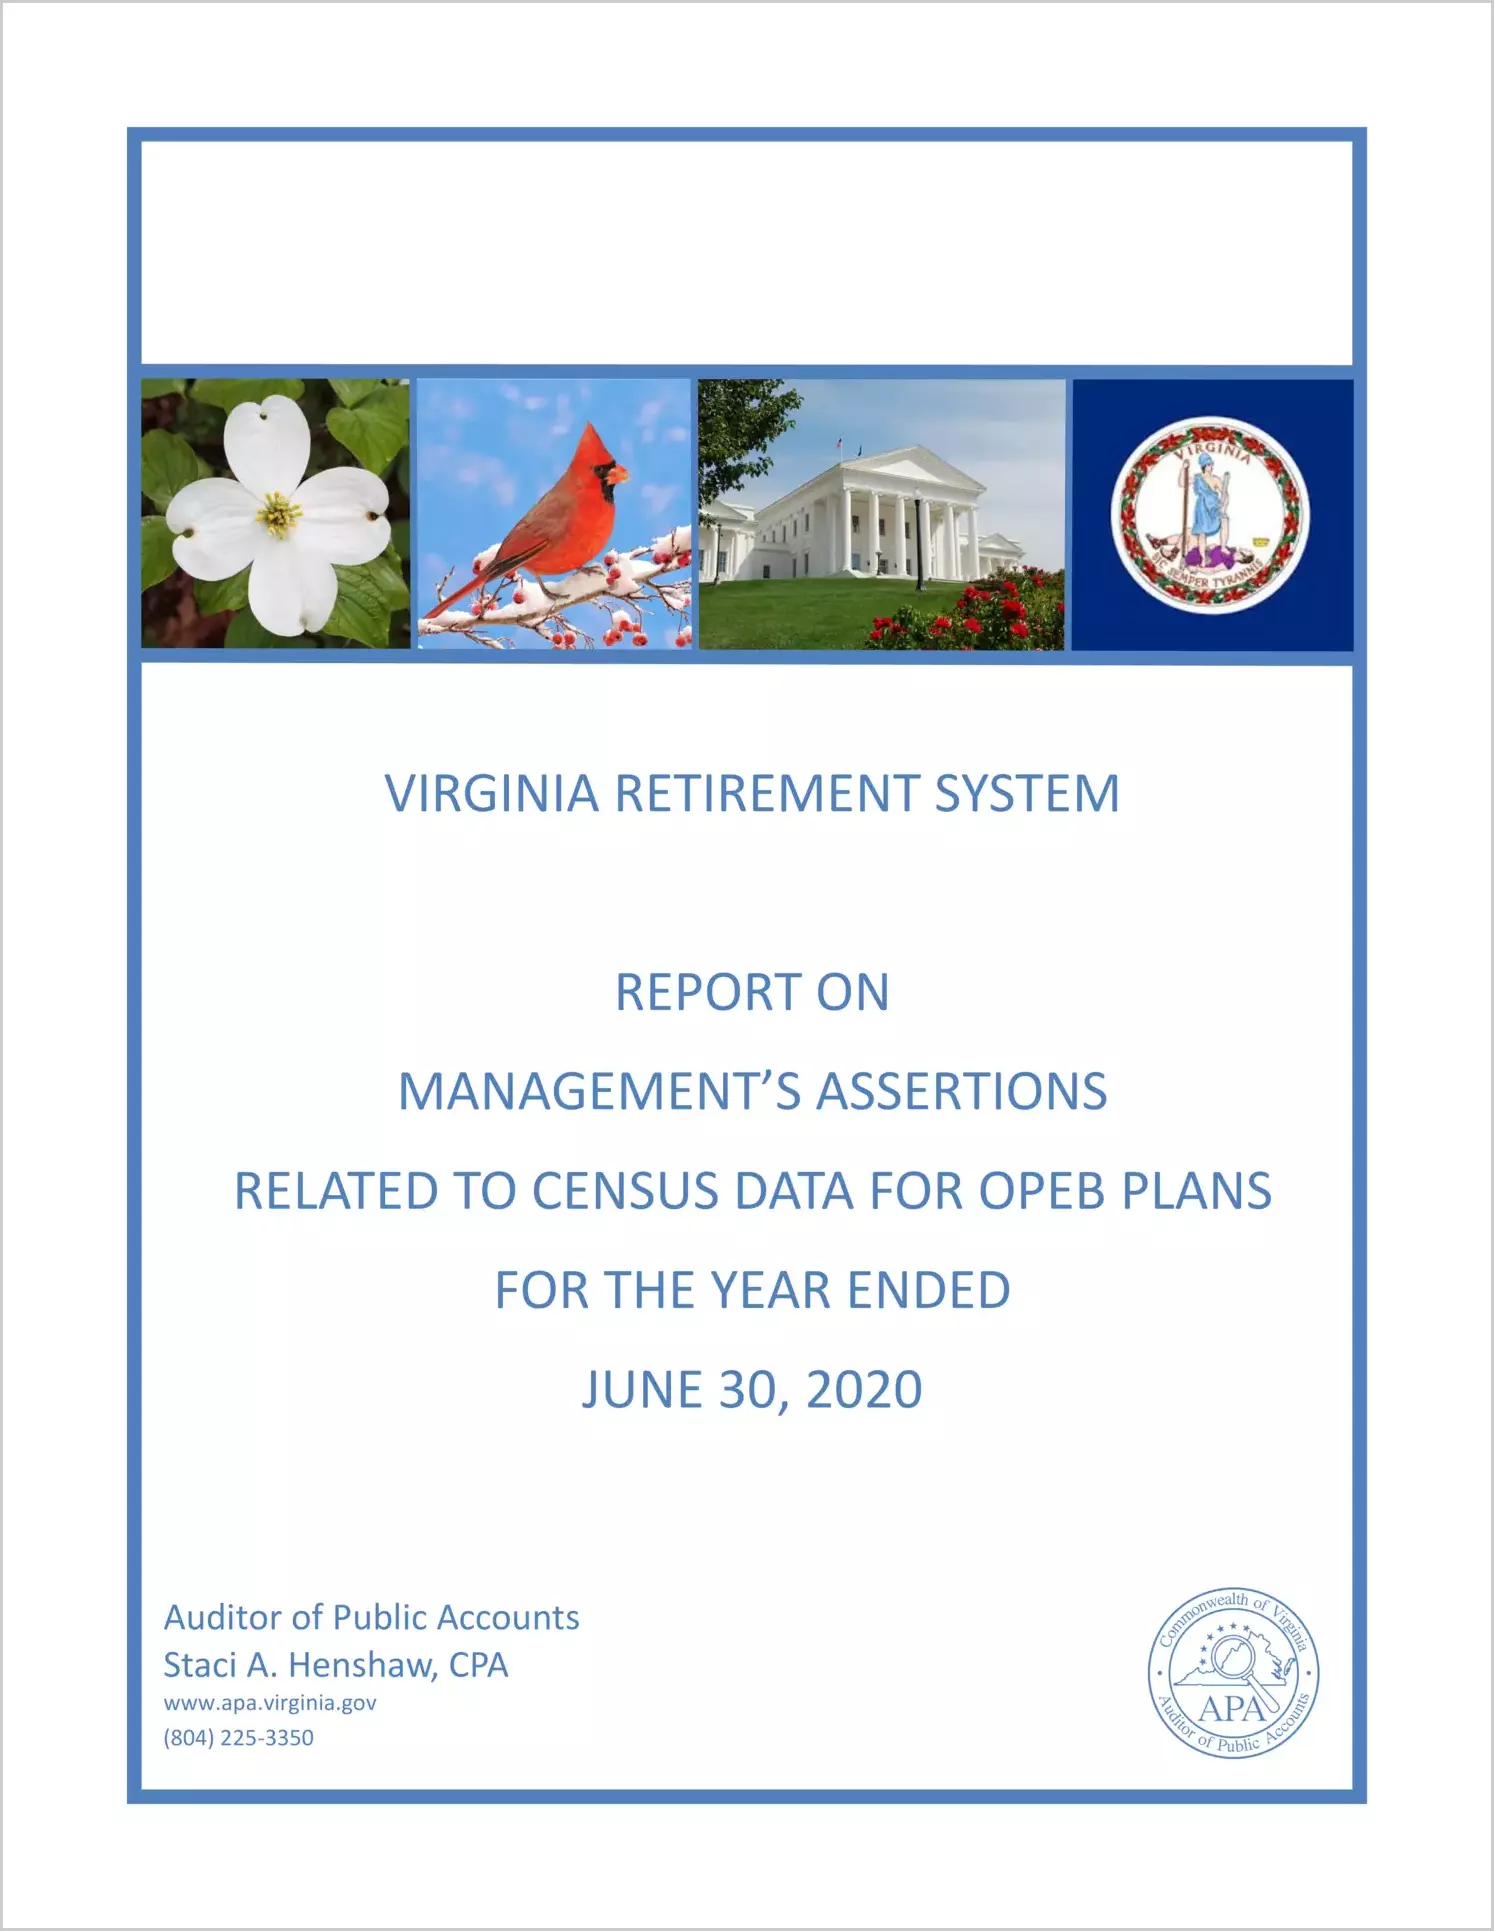 Virginia Retirement System Report on Management's Assertions Related to Census Data for OPEB Plans for the year ended June 30, 2020